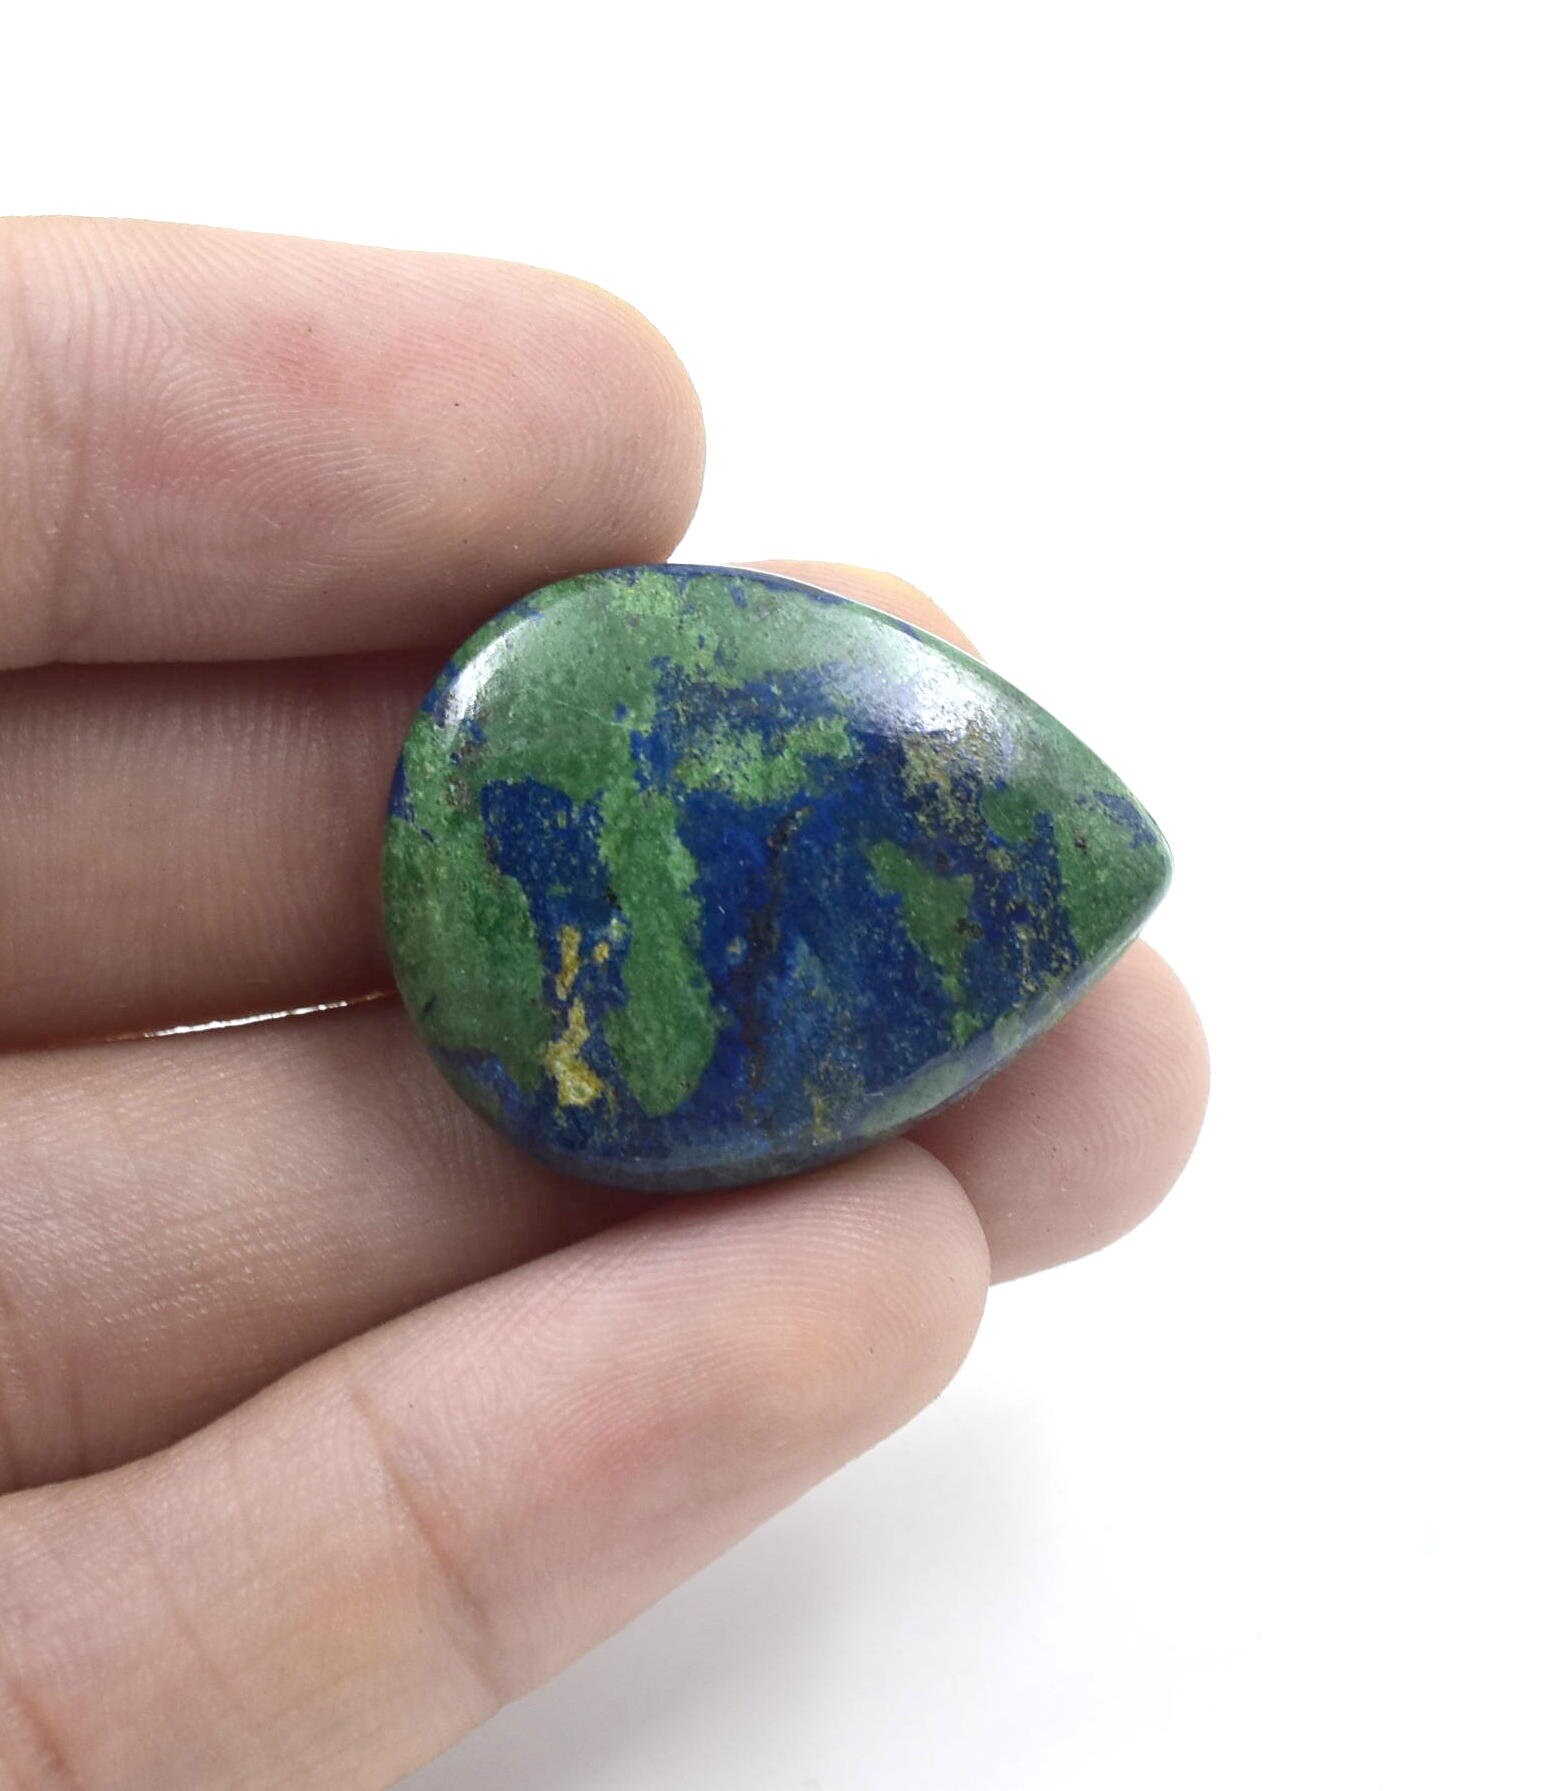 100% Natural Azurite Malachite Cabochon Good quality stone Beautiful Art Making for jewellery Ring 45.95 CARAT 28X22 MM | Save 33% - Rajasthan Living 12